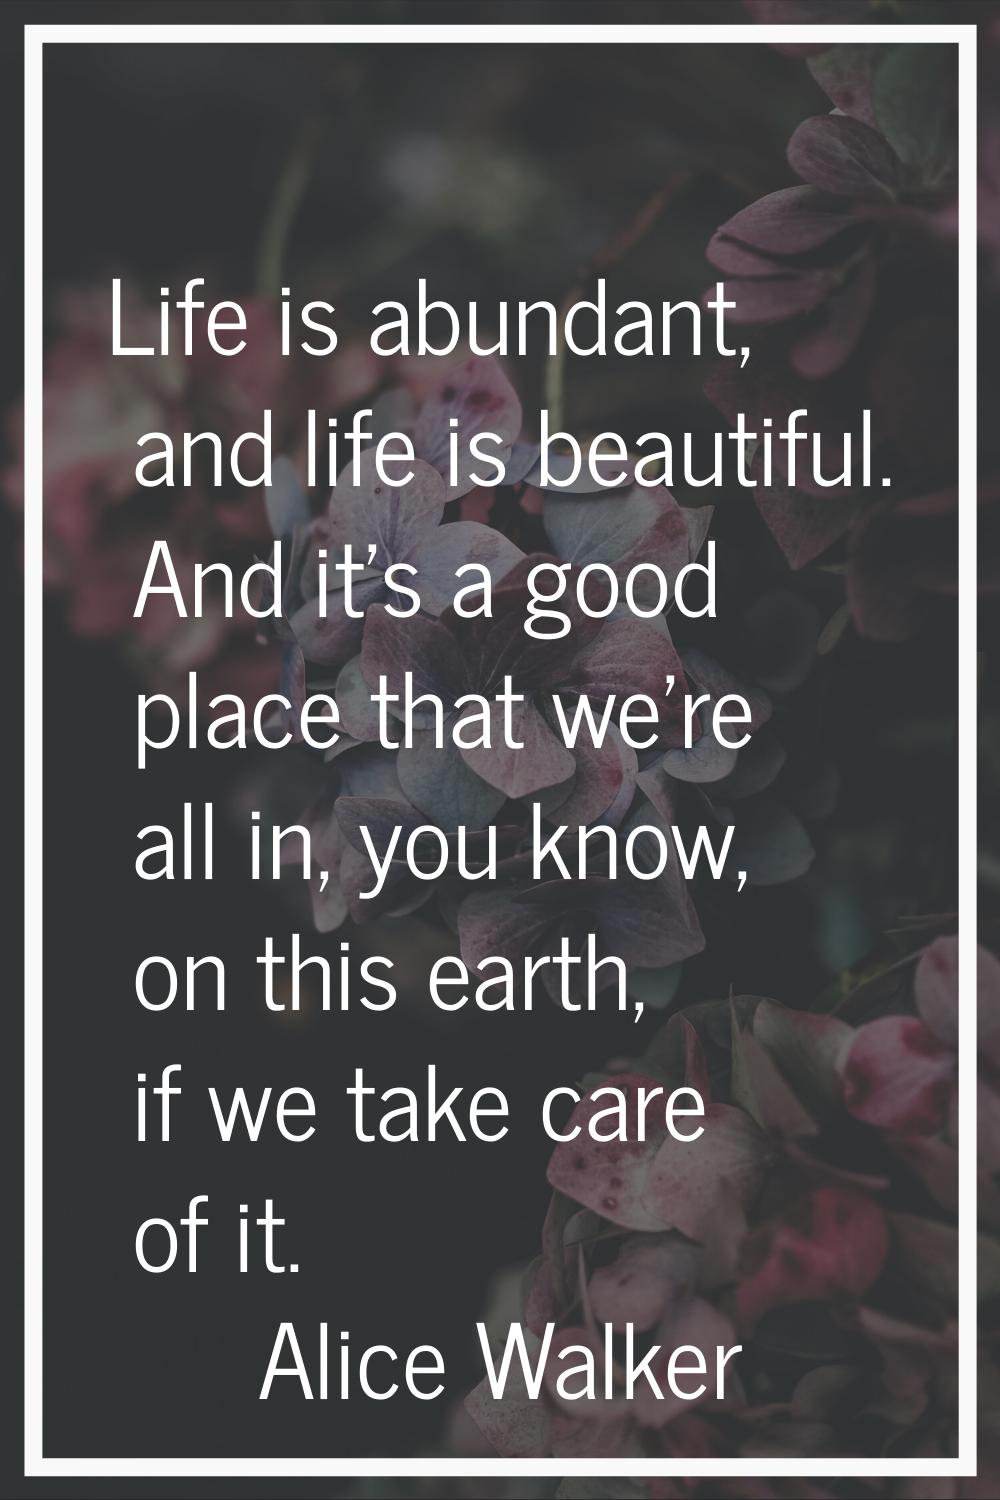 Life is abundant, and life is beautiful. And it's a good place that we're all in, you know, on this